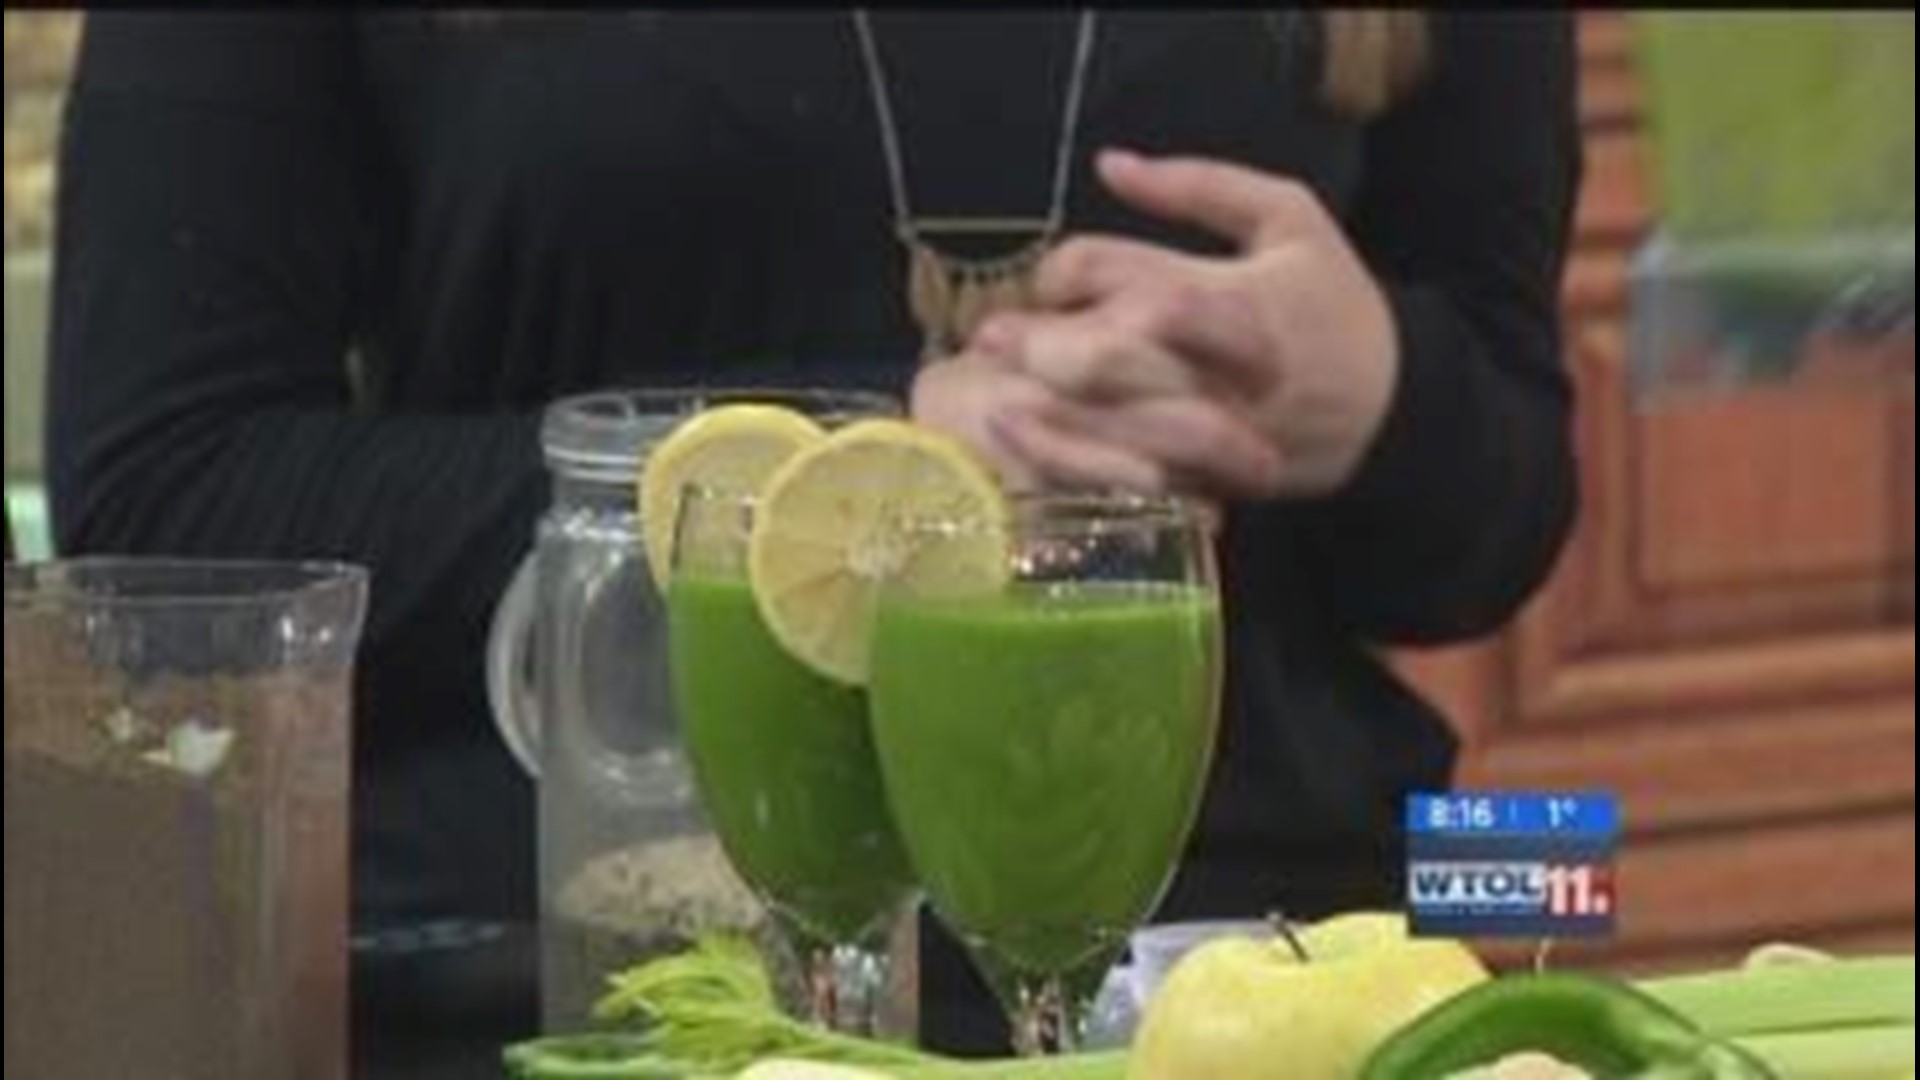 Mary Pietras gives 3 tips for health resolutions